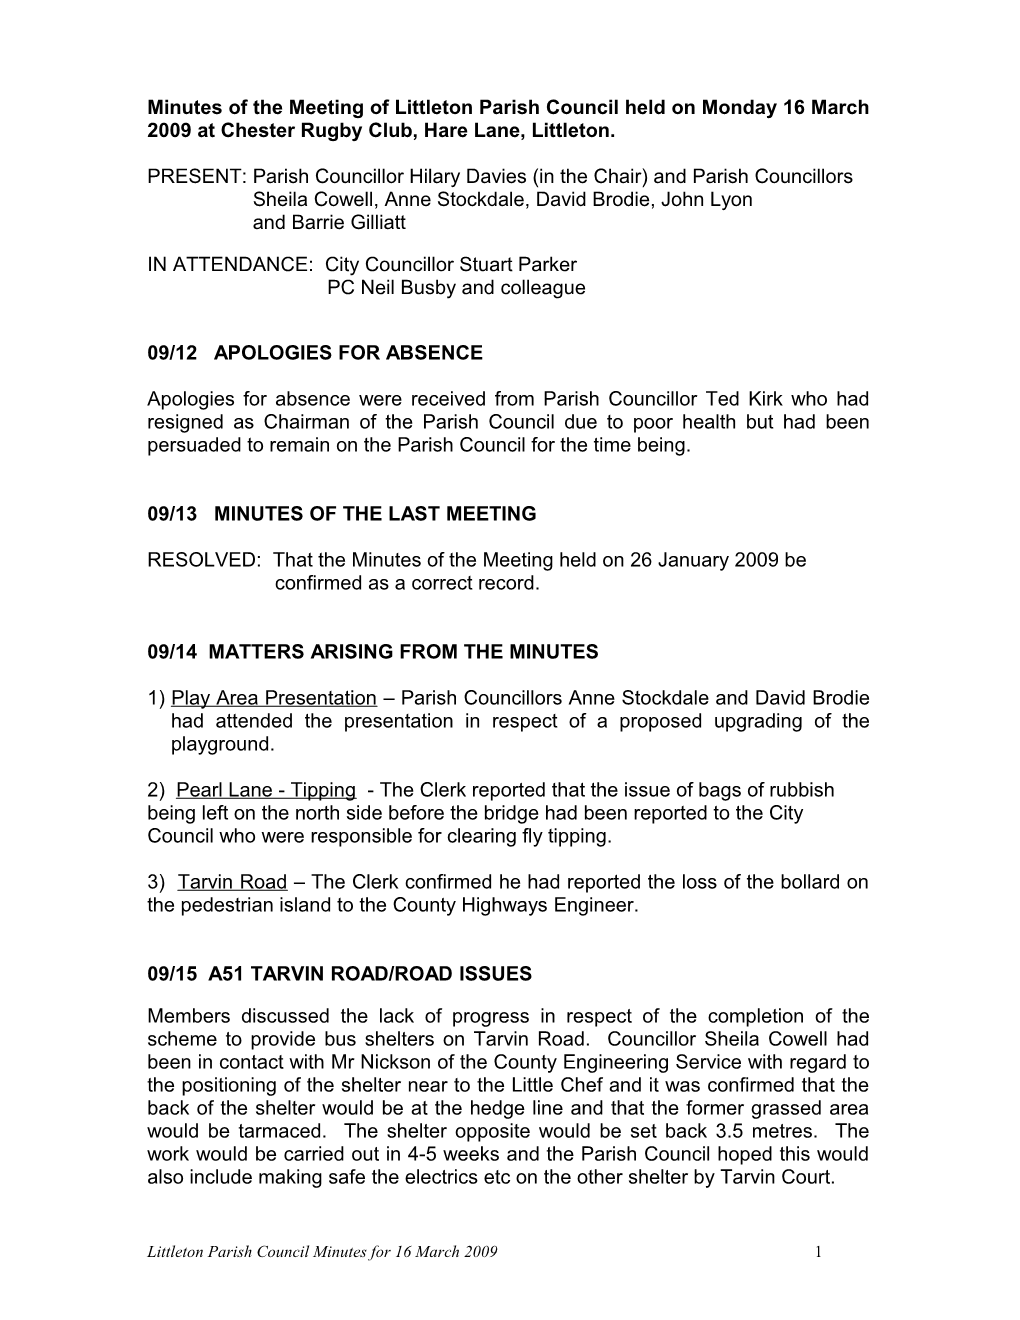 Minutes of the Meeting of Littleton Parish Council Held on Monday 8 July 2002 at Chester